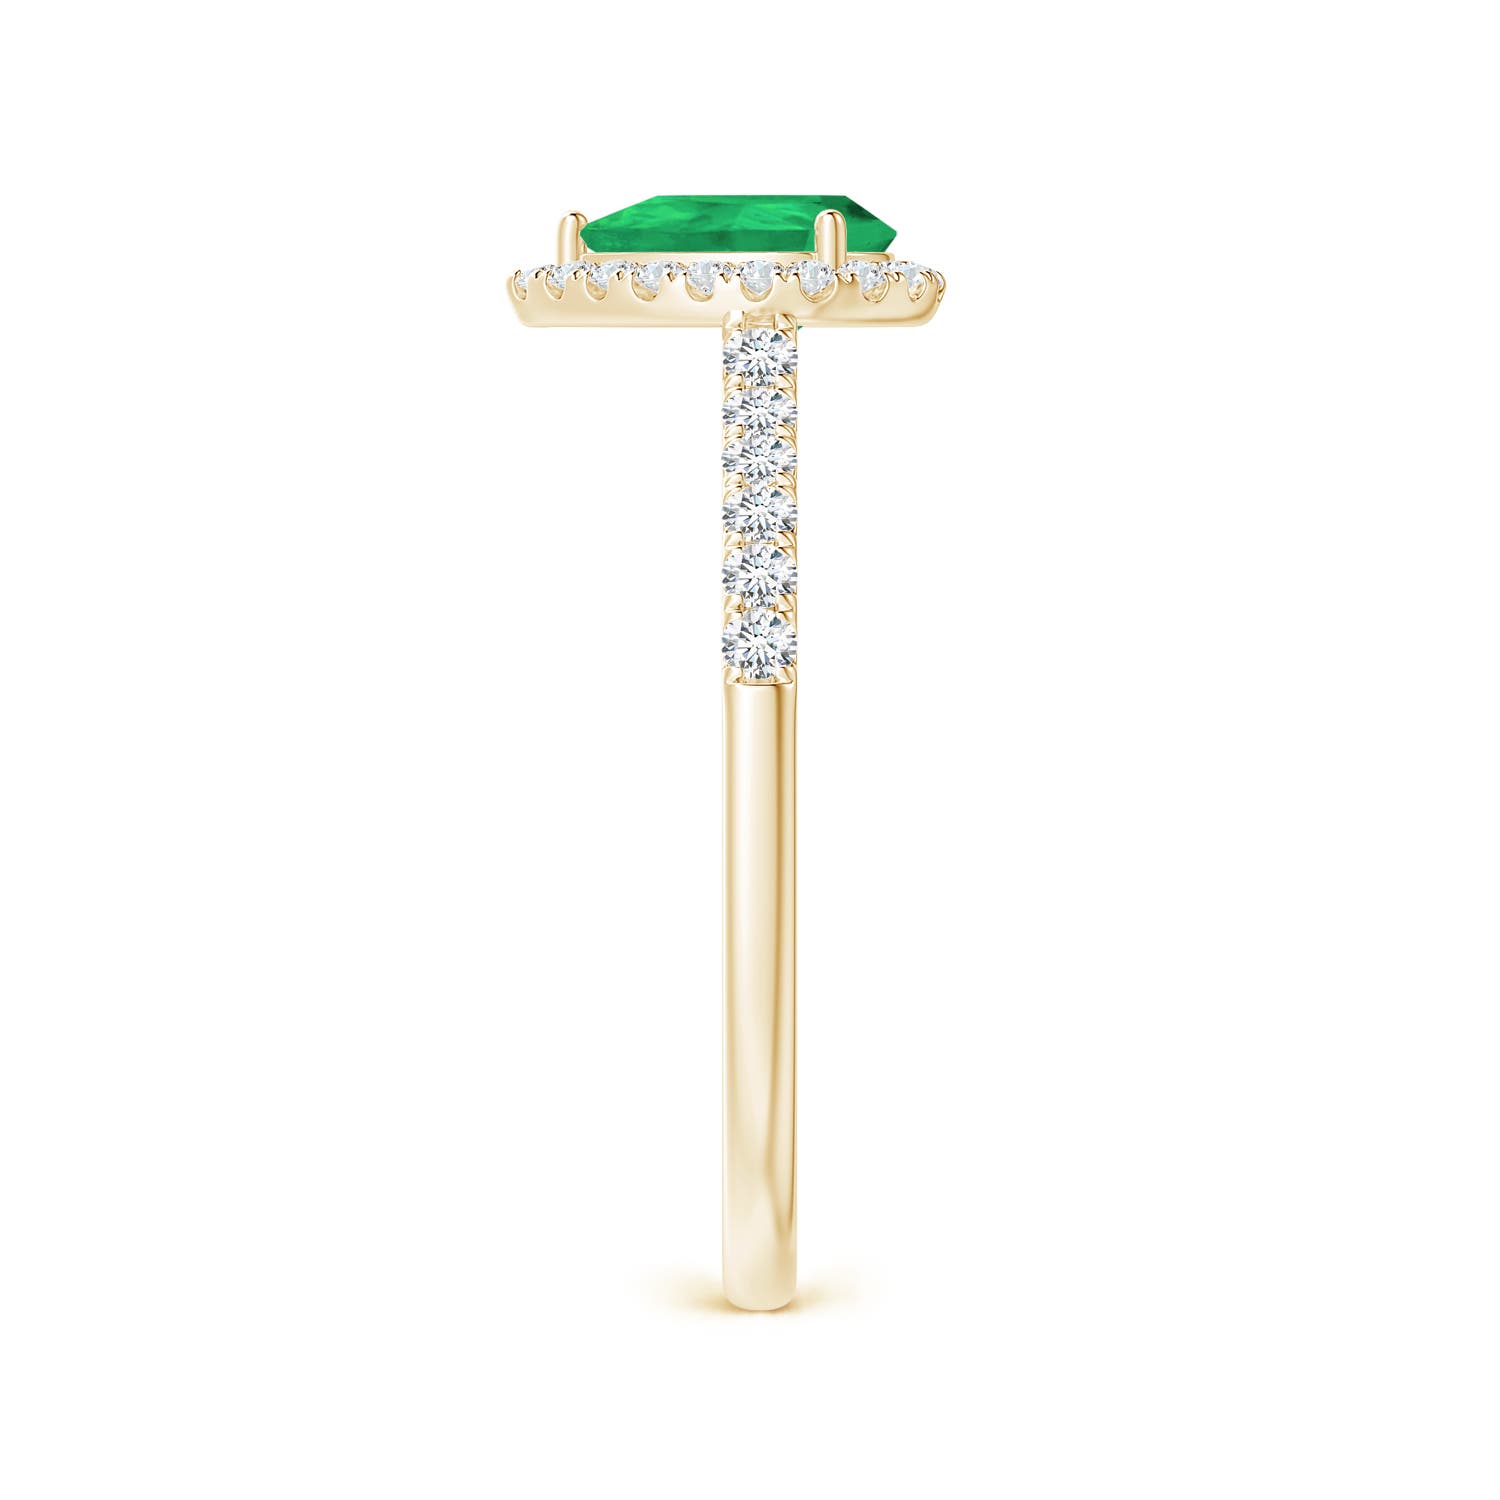 A - Emerald / 0.88 CT / 14 KT Yellow Gold